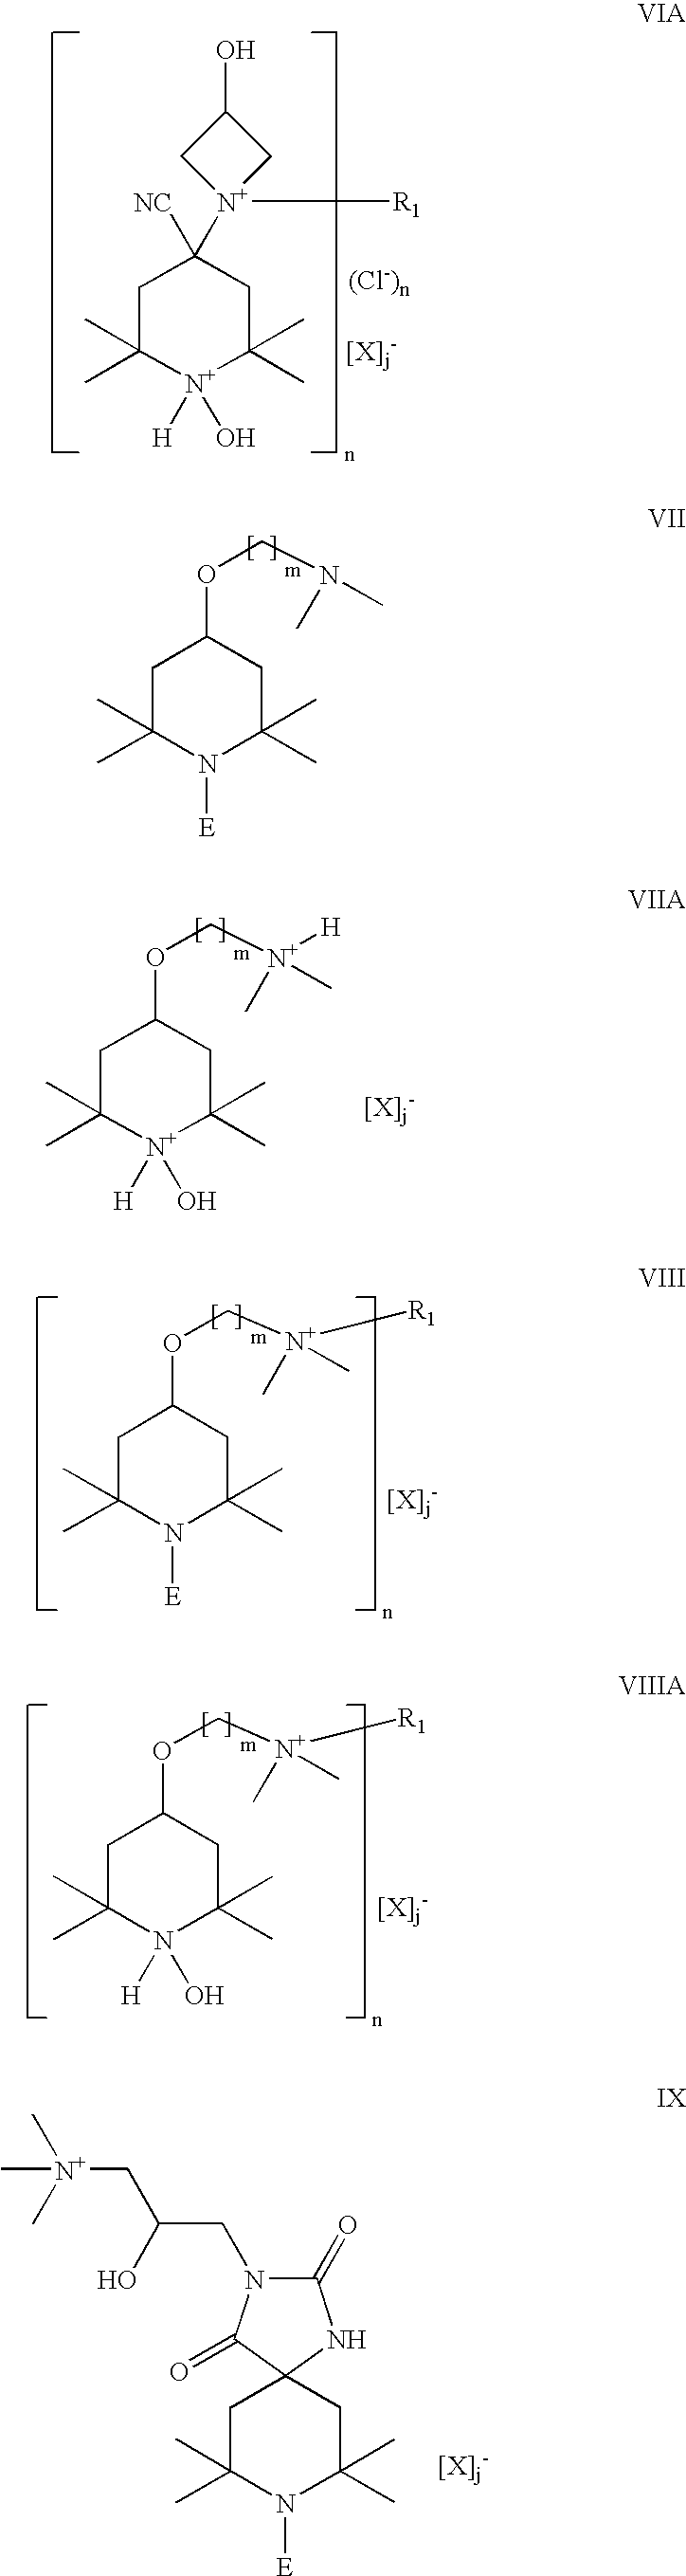 Chlorohydrin and cationic compounds having high affinity for pulp or paper